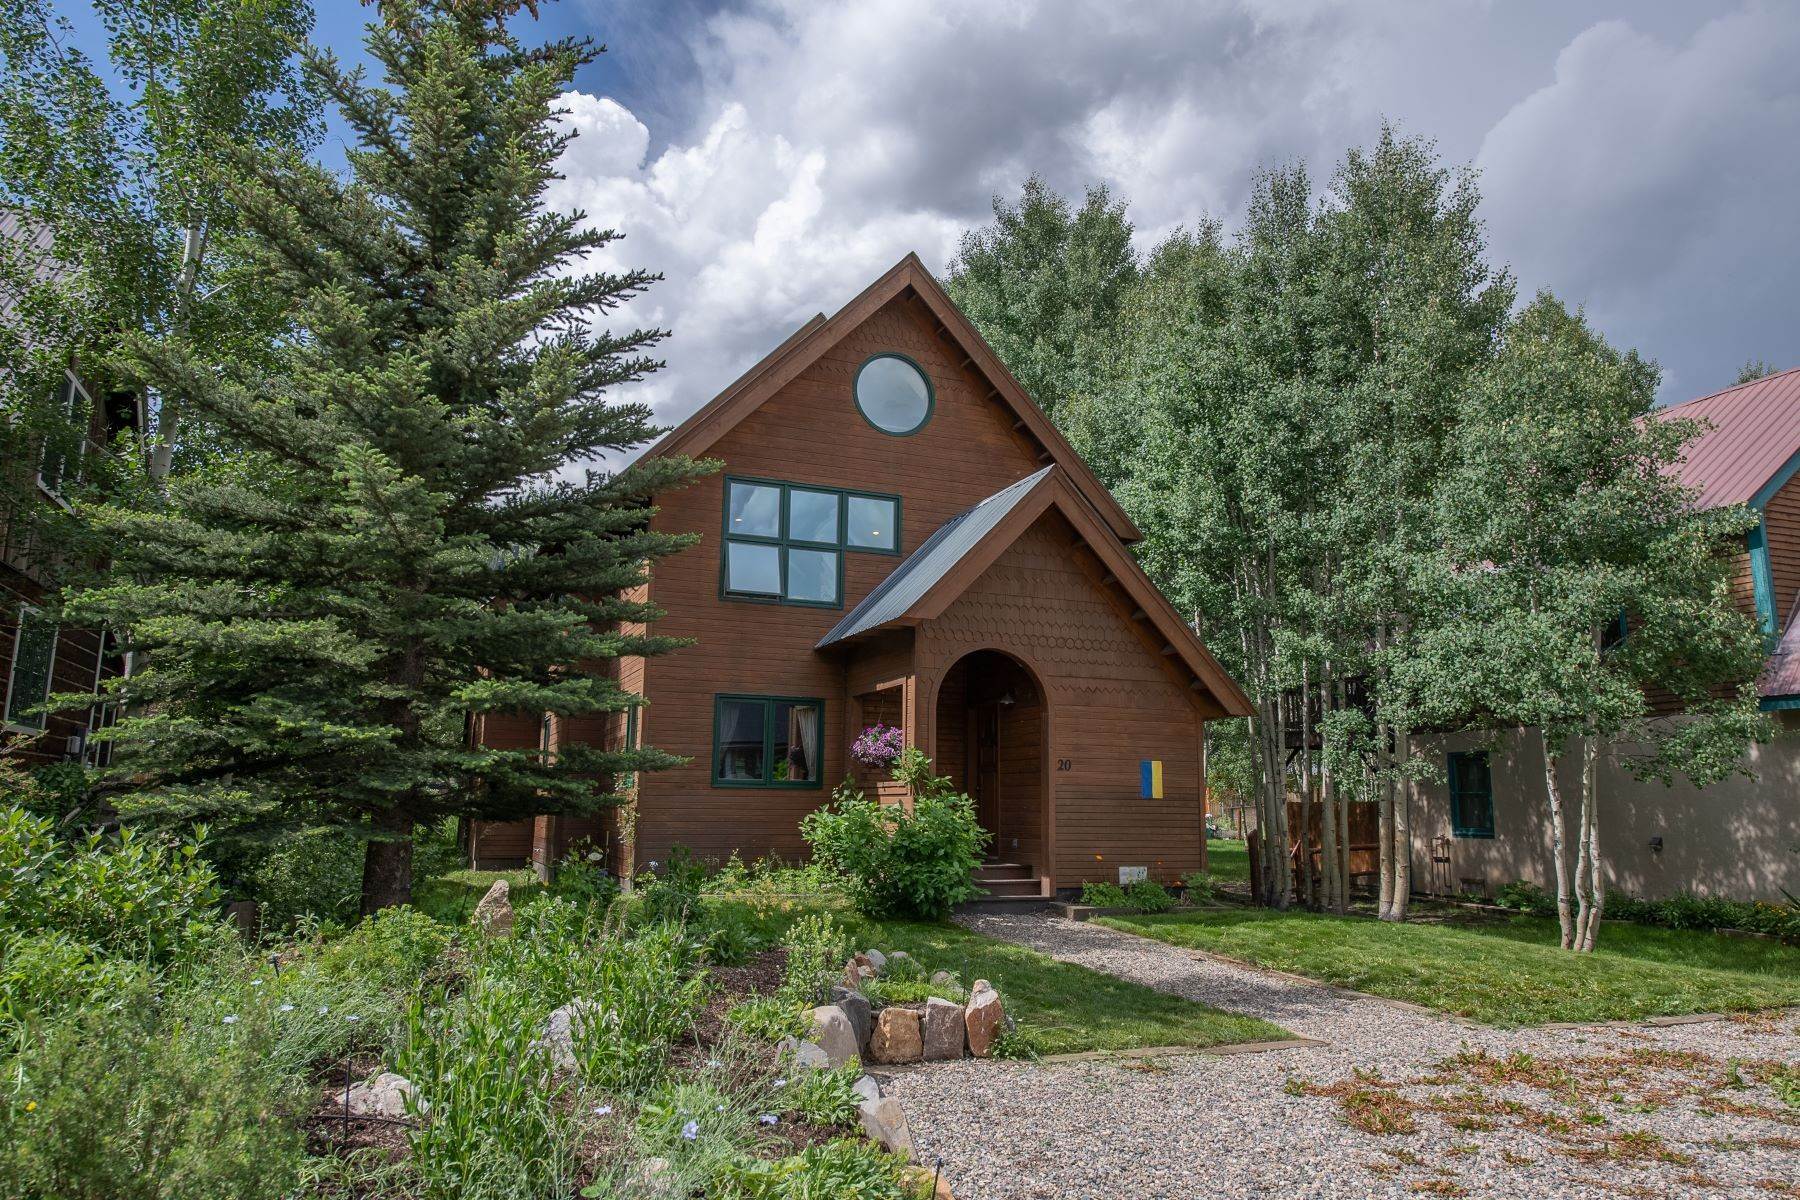 Property for Active at Quintessential Crested Butte home 20 Butte Avenue Crested Butte, Colorado 81224 United States